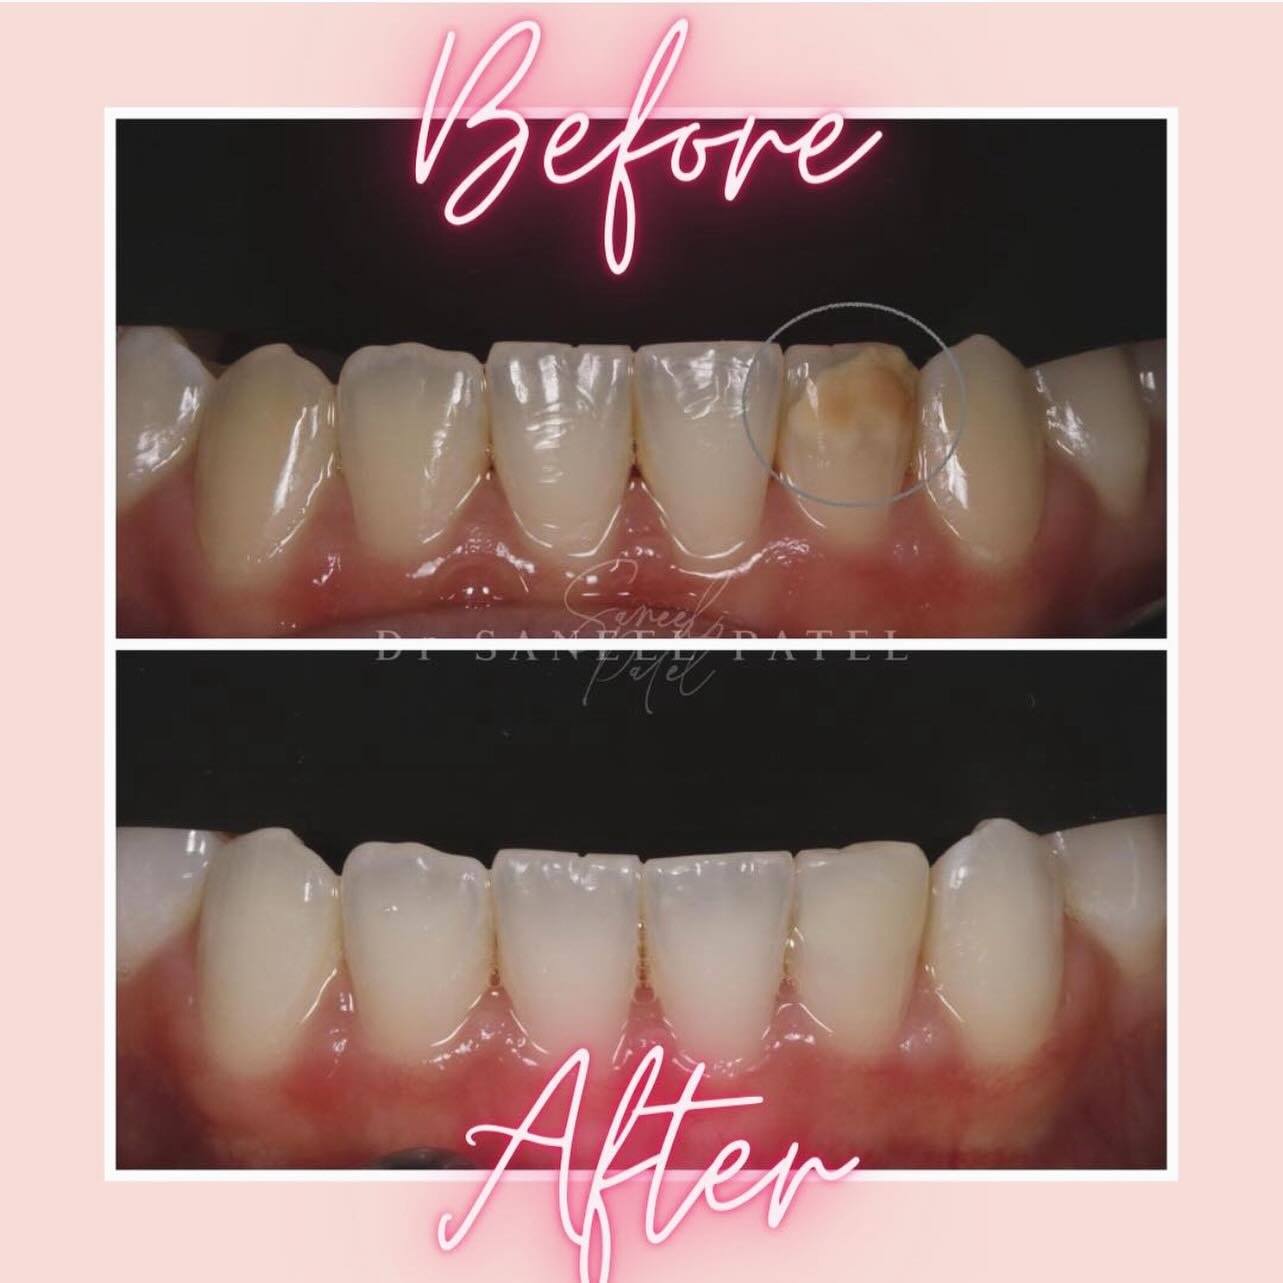 ICON treatment to remove discolouration with composite bonding produces stunning results!
🦷
Wonderful before and after by Saneel at @waysidedentalpractice .
😀
Call reception to book a smile consultation today on 01582 712470!
✨
For more information